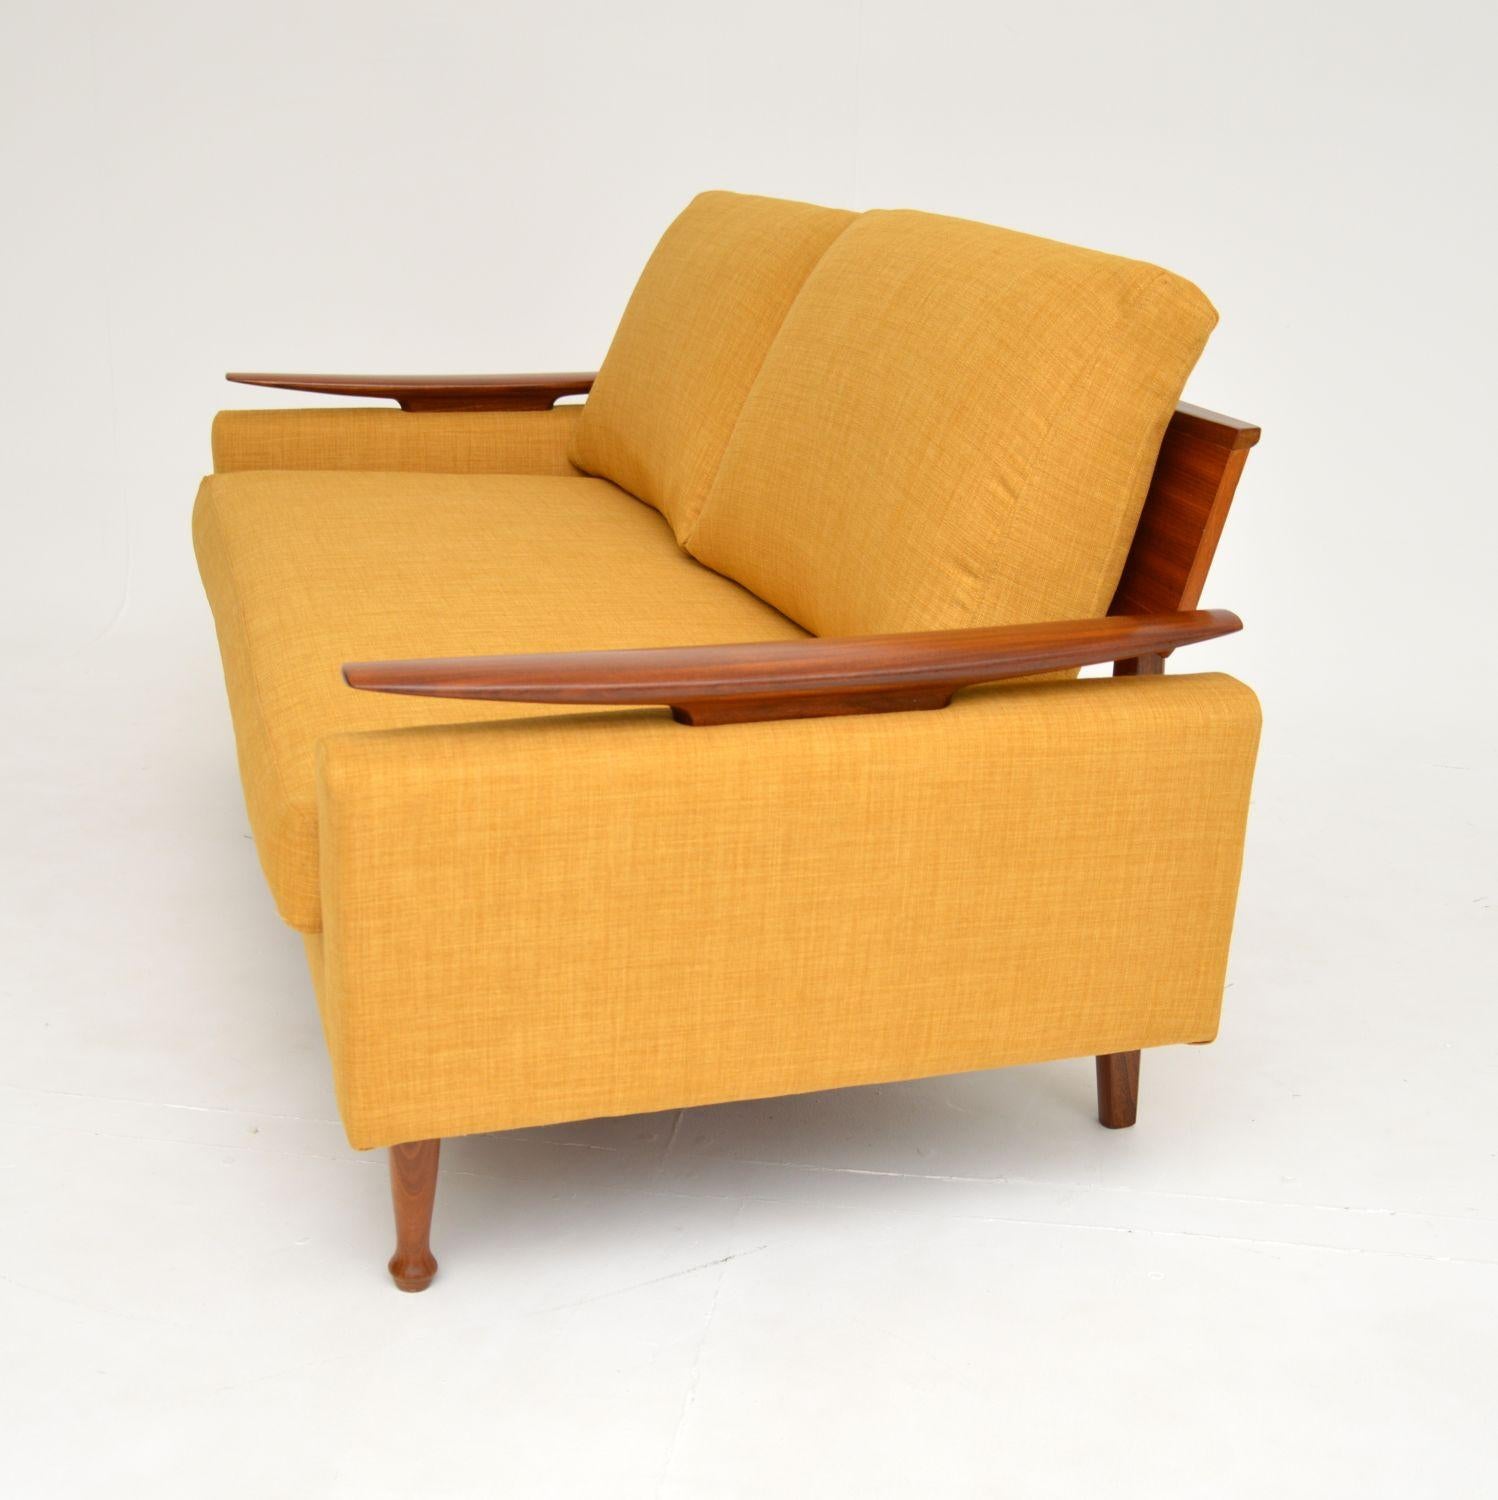 1960's Vintage Sofa Bed by Greaves & Thomas 1